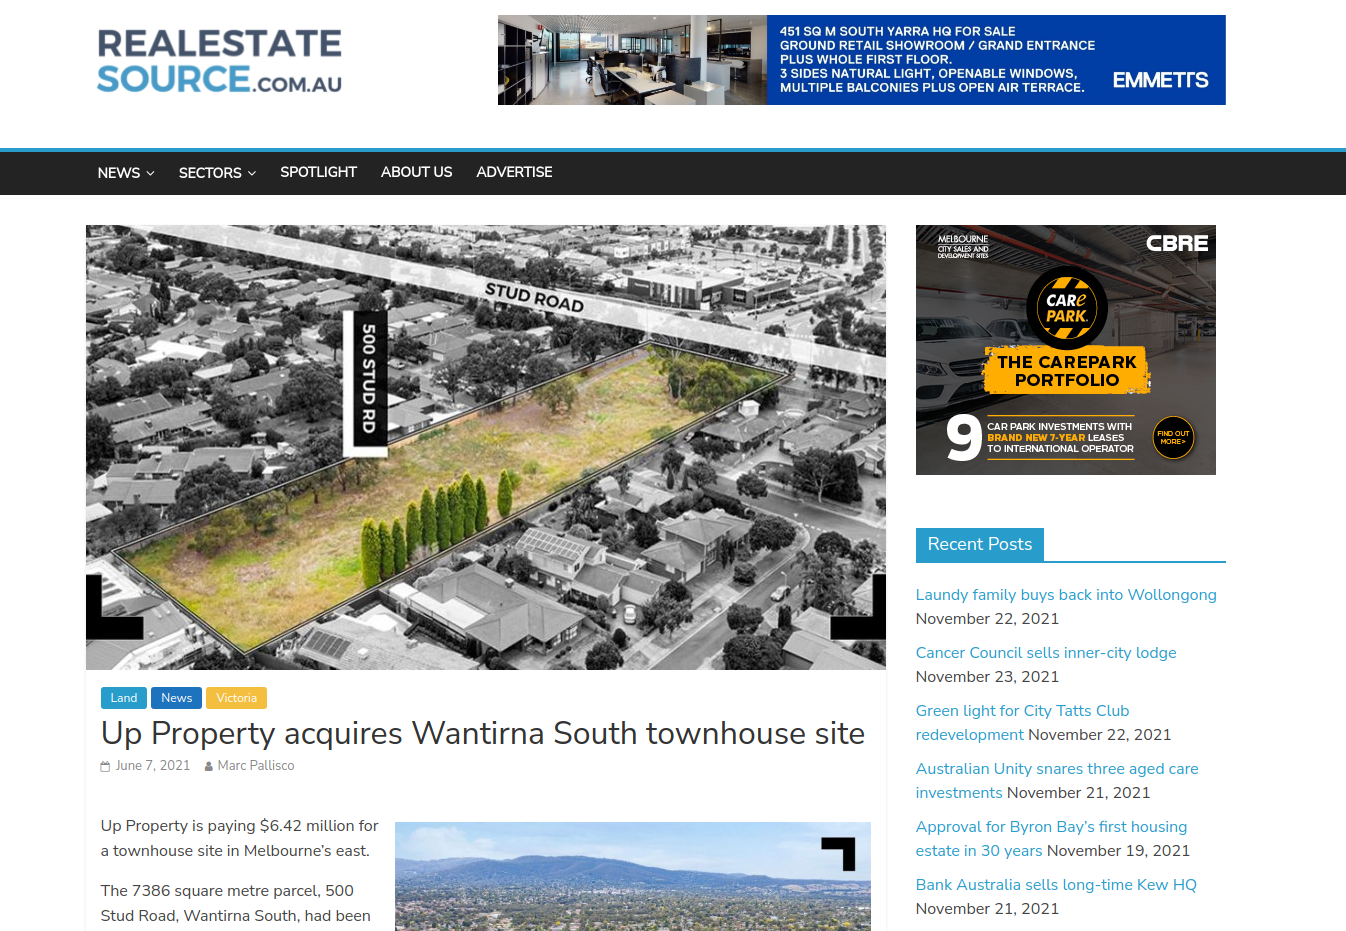 Commercial  Real Estate Property Development Geelong